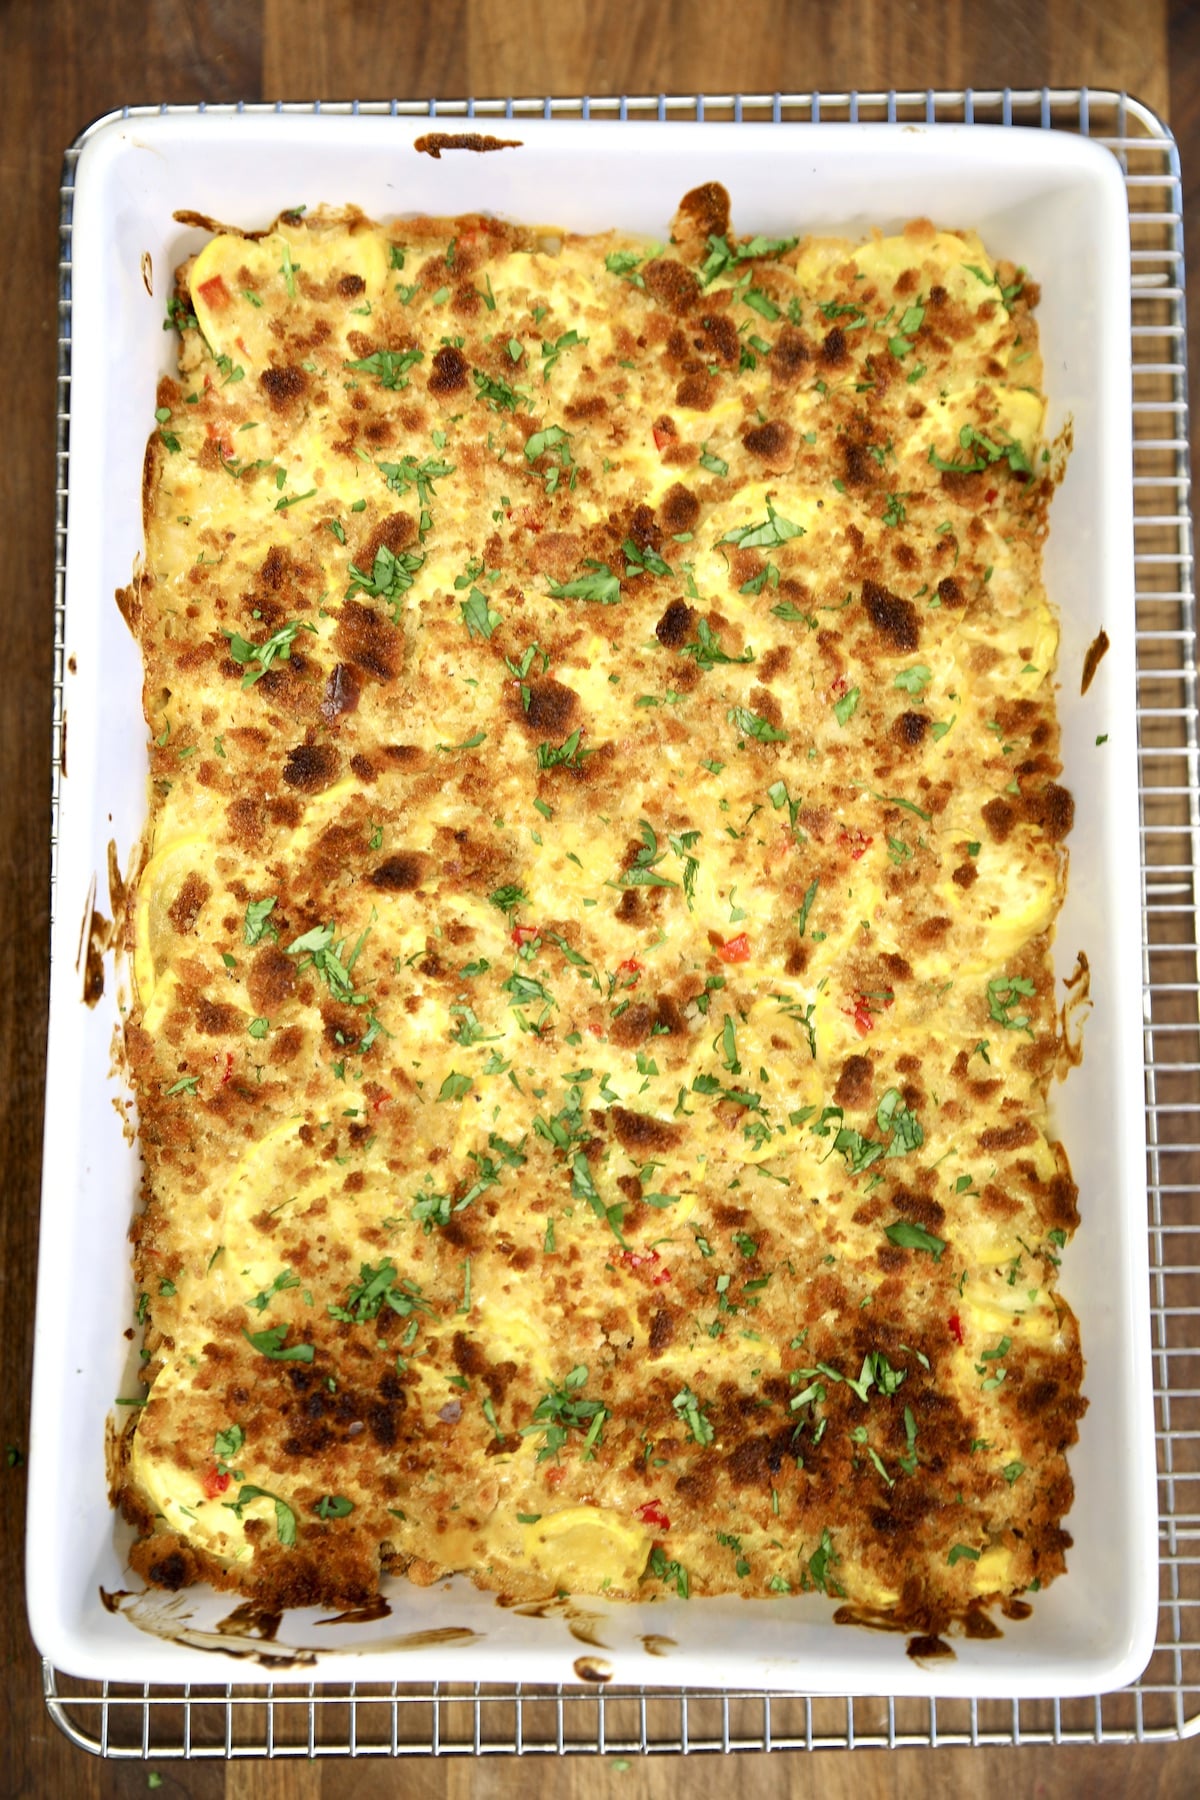 Baked squash casserole in a 9 x 13 inch dish.